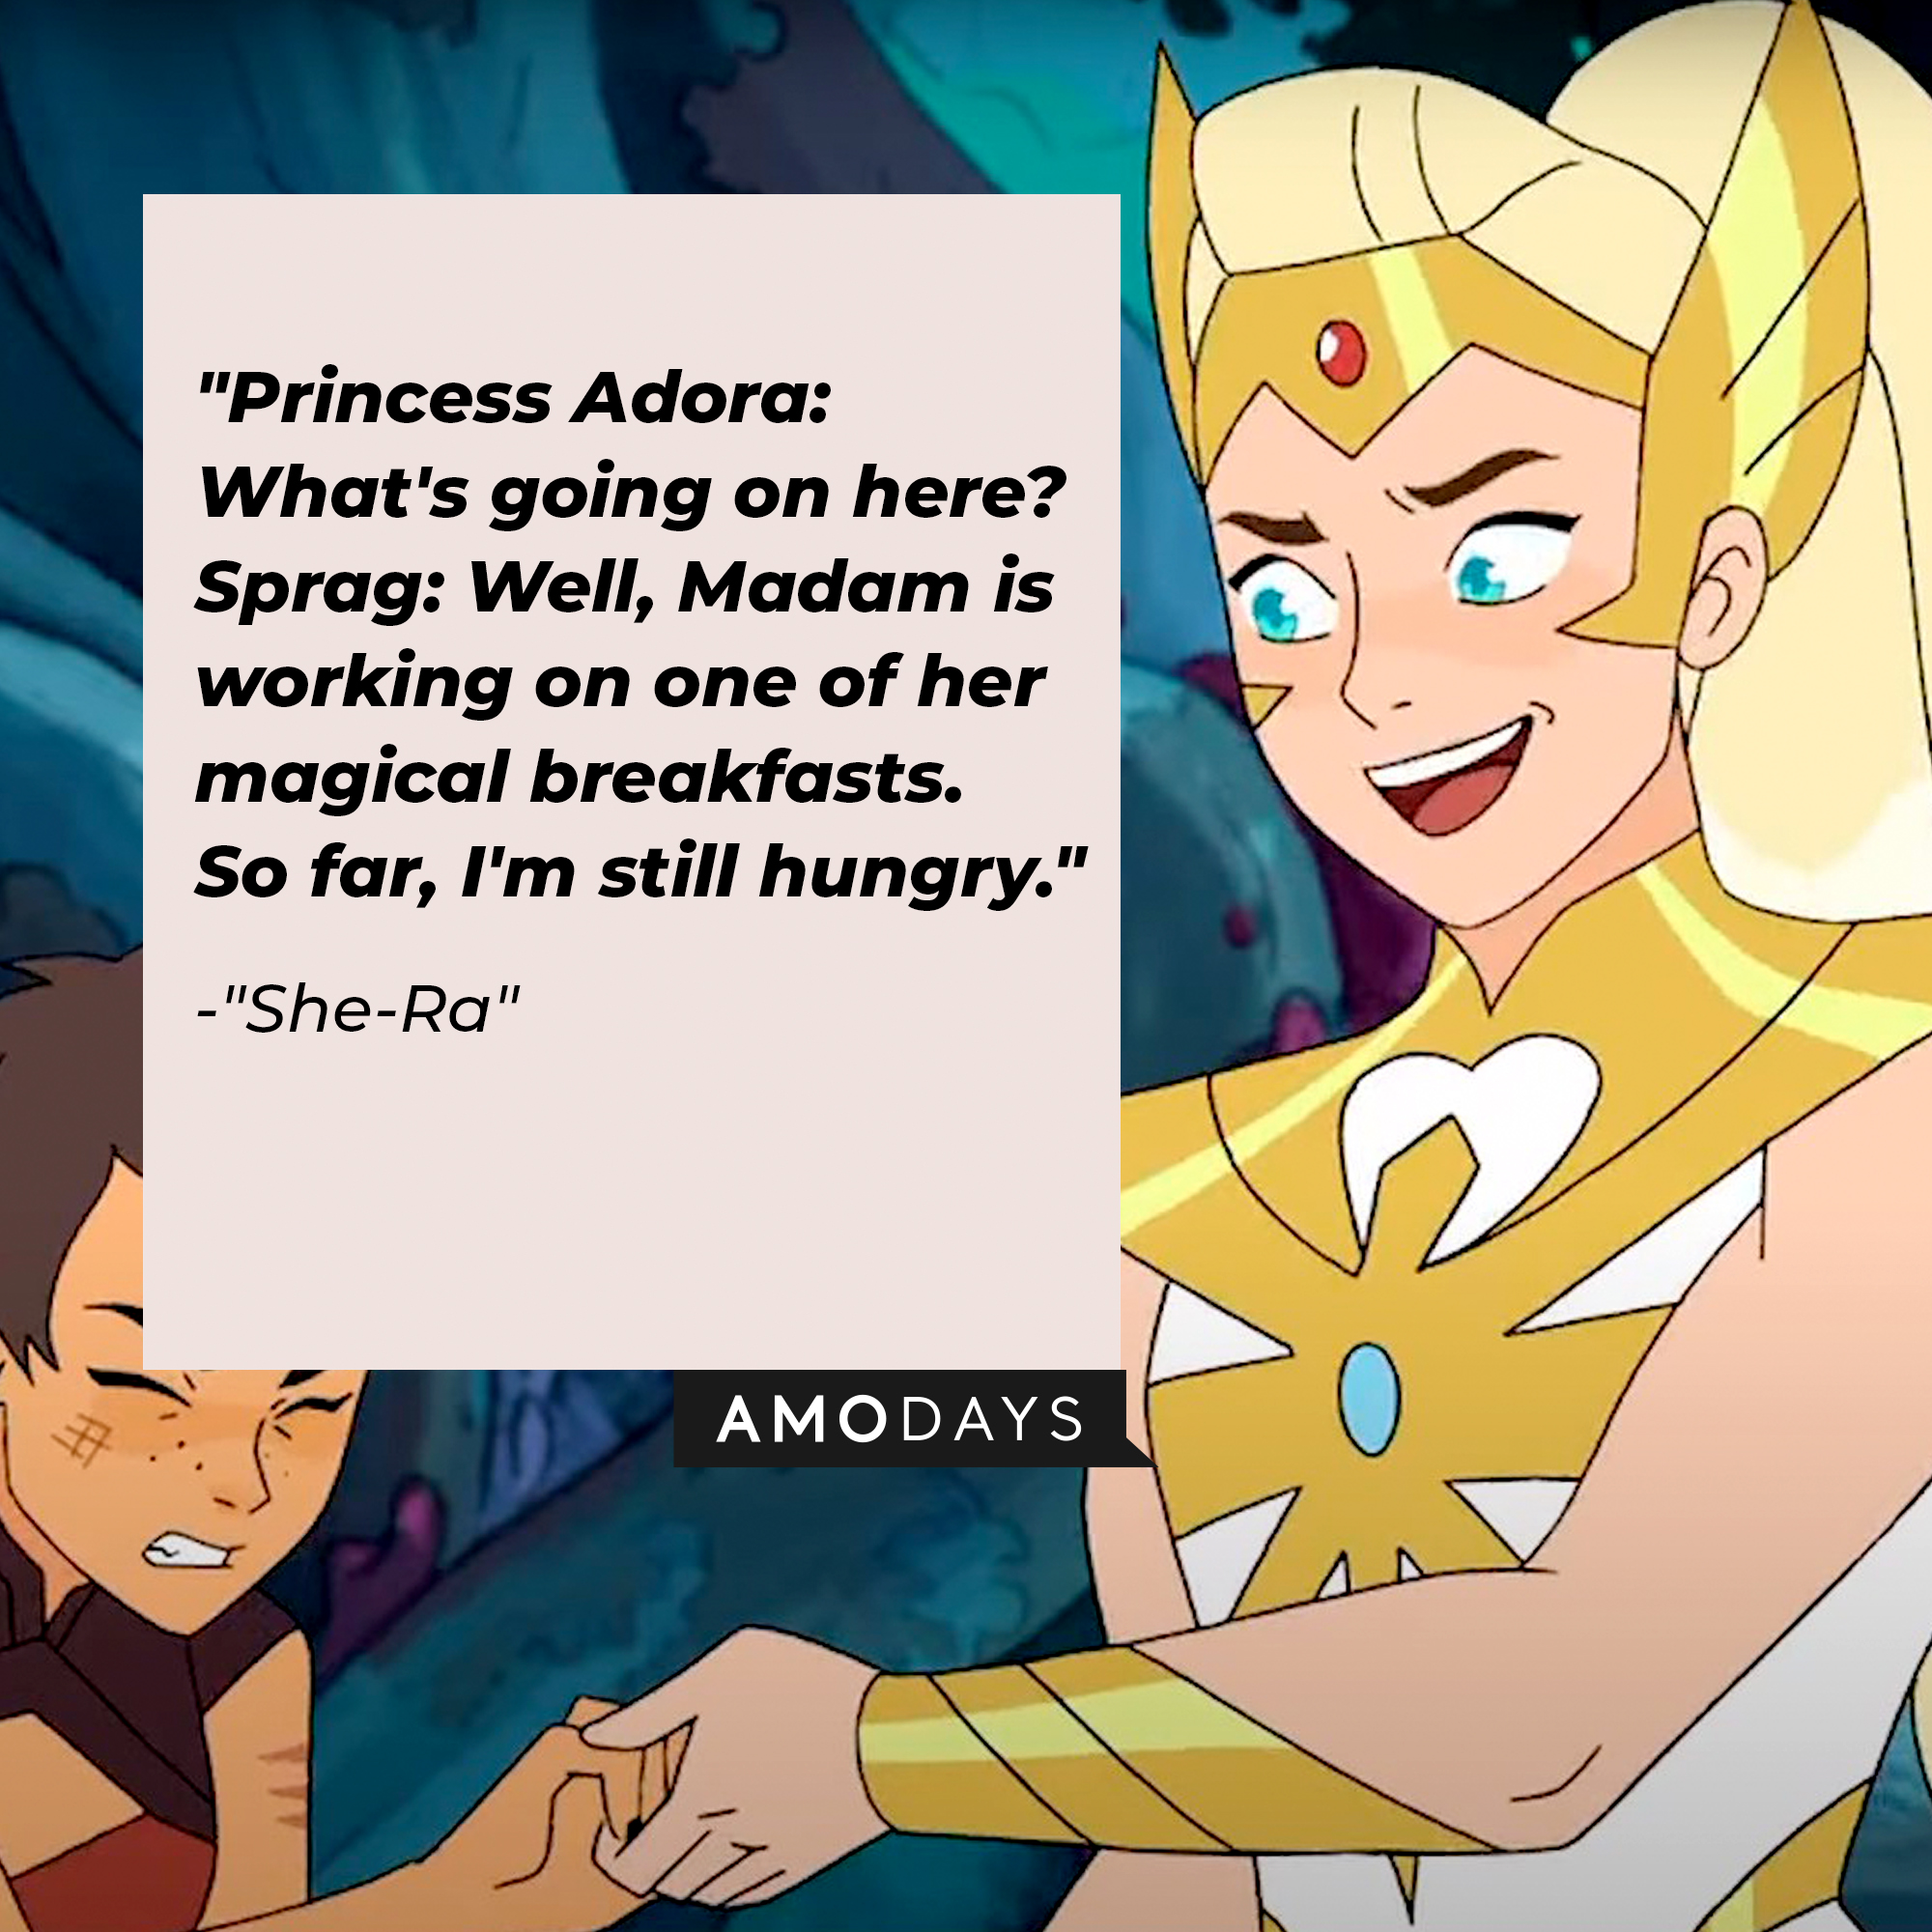 "She-Ra's" quote: "Princess Adora: What's going on here? / Sprag: Well, Madam is working on one of her magical breakfasts. So far, I'm still hungry." | Source: Facebook.com/DreamWorksSheRa